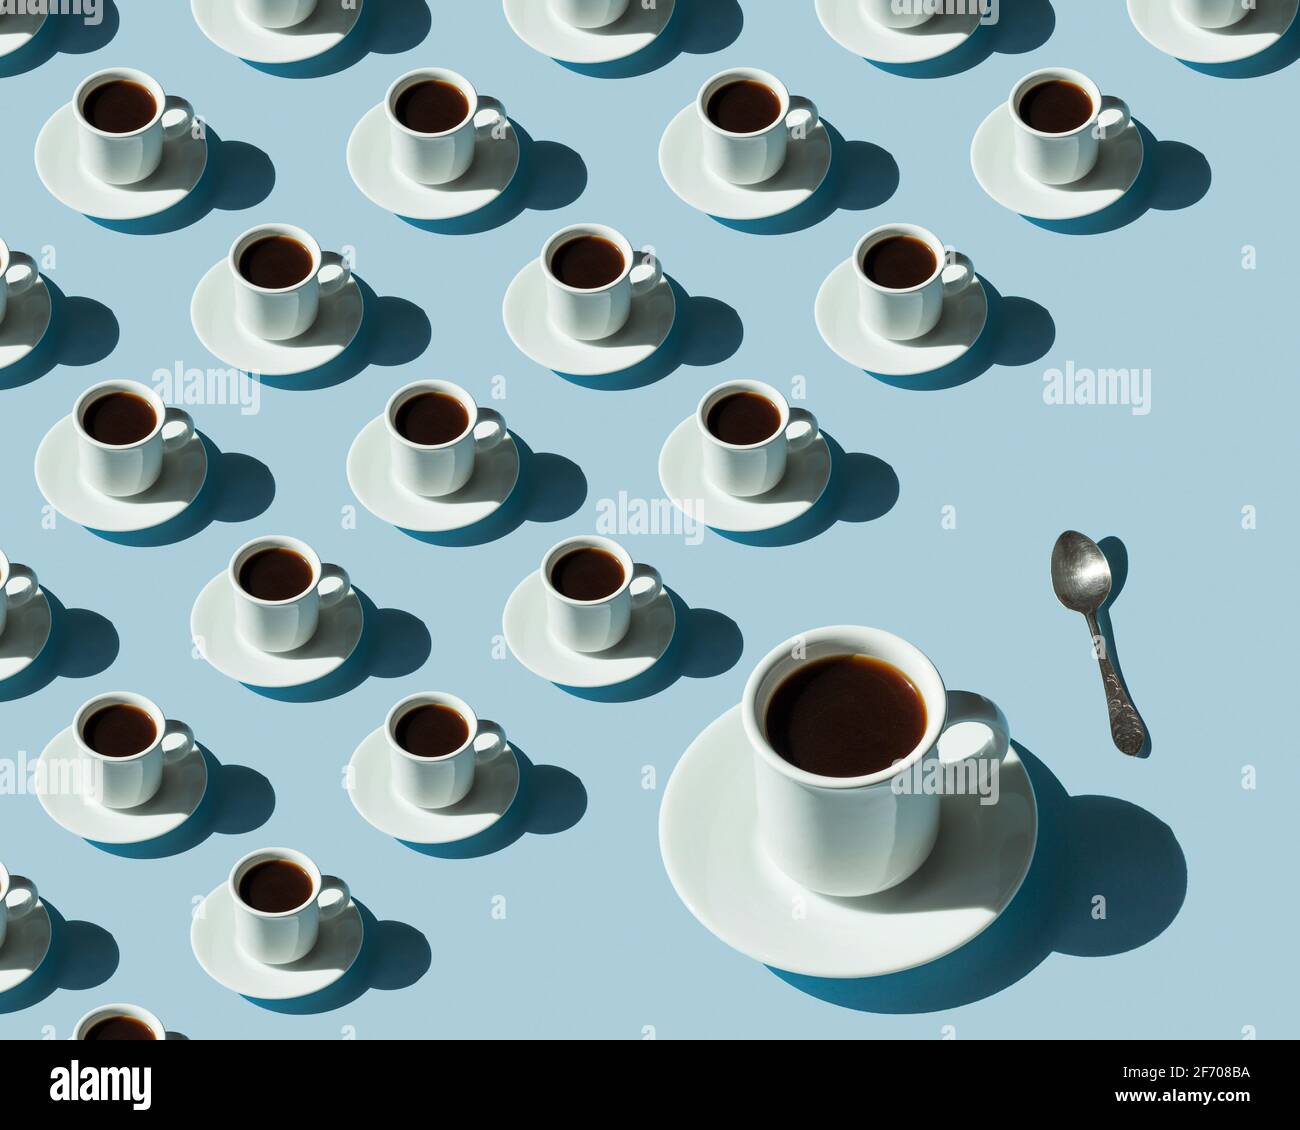 Rhythmic pattern from cups with coffee on a blue background. Stock Photo